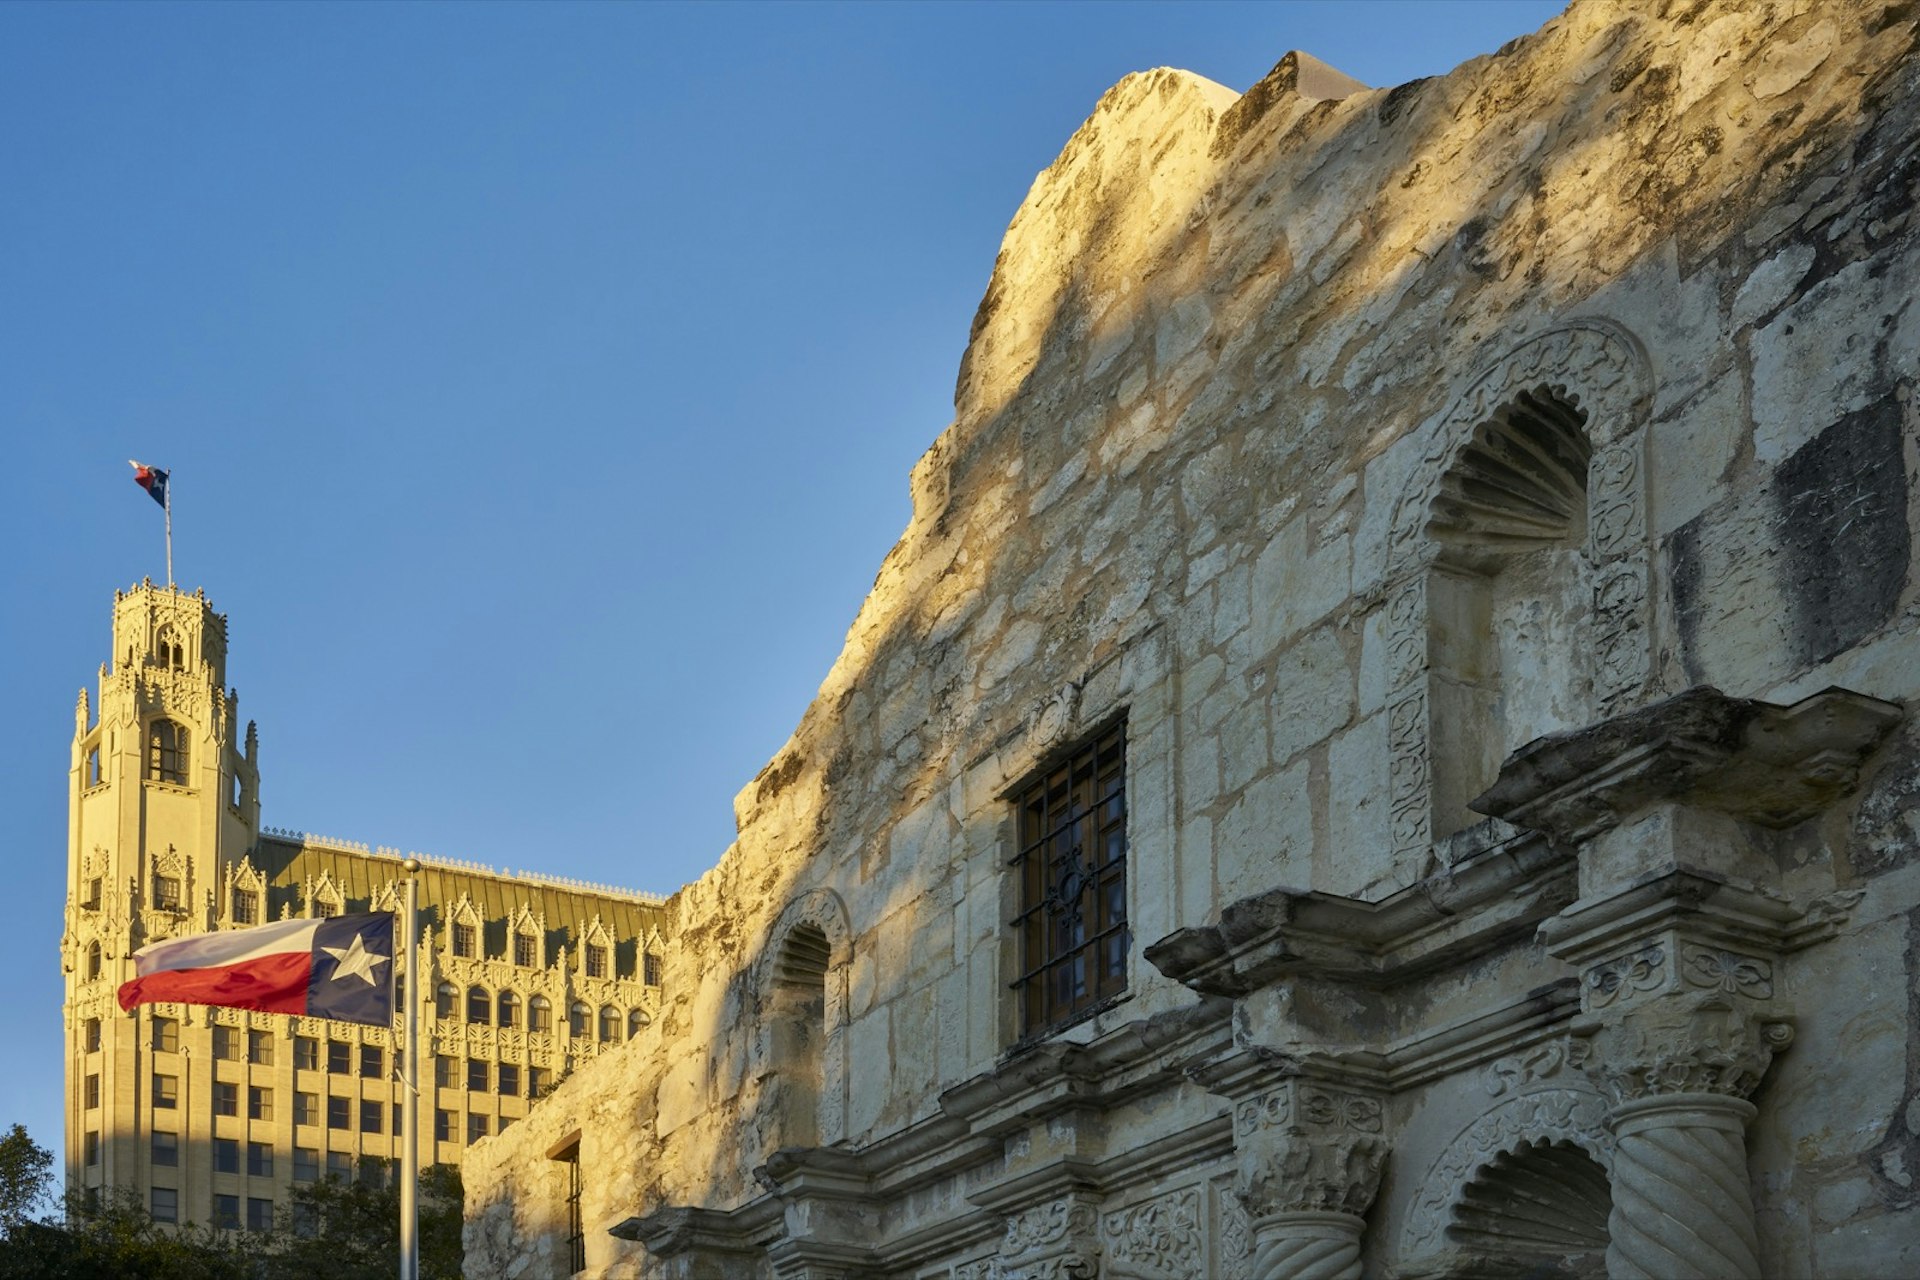 The sun sets on the Alamo and the Emily Morgan Hotel in San Antonio © Erik Pronske Photography / Getty Images